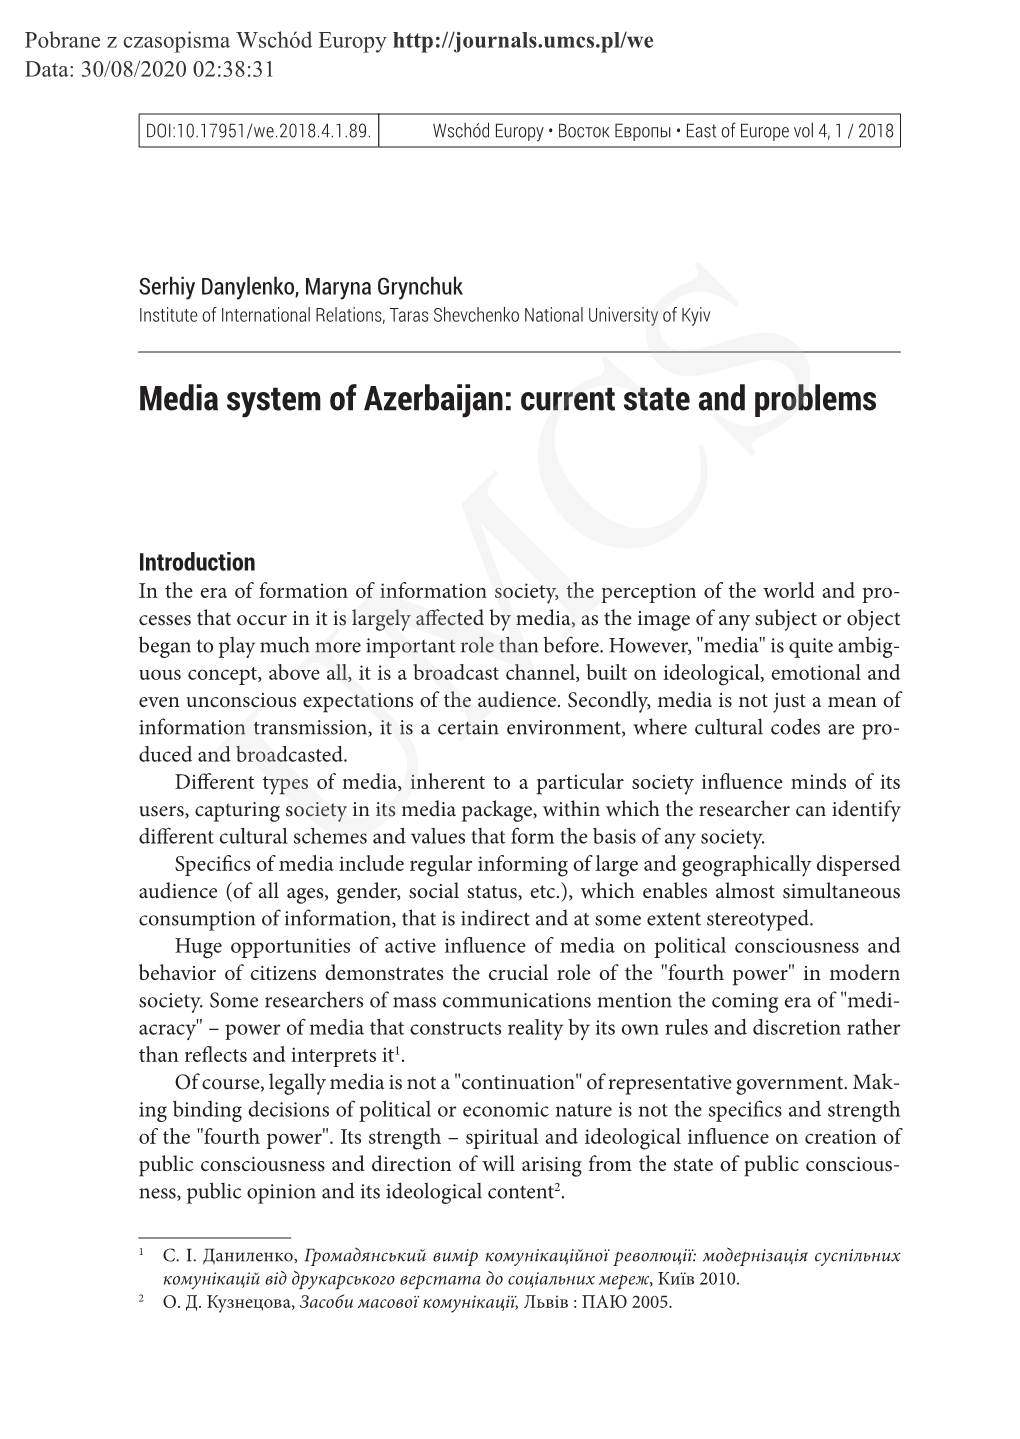 Media System of Azerbaijan: Current State and Problems